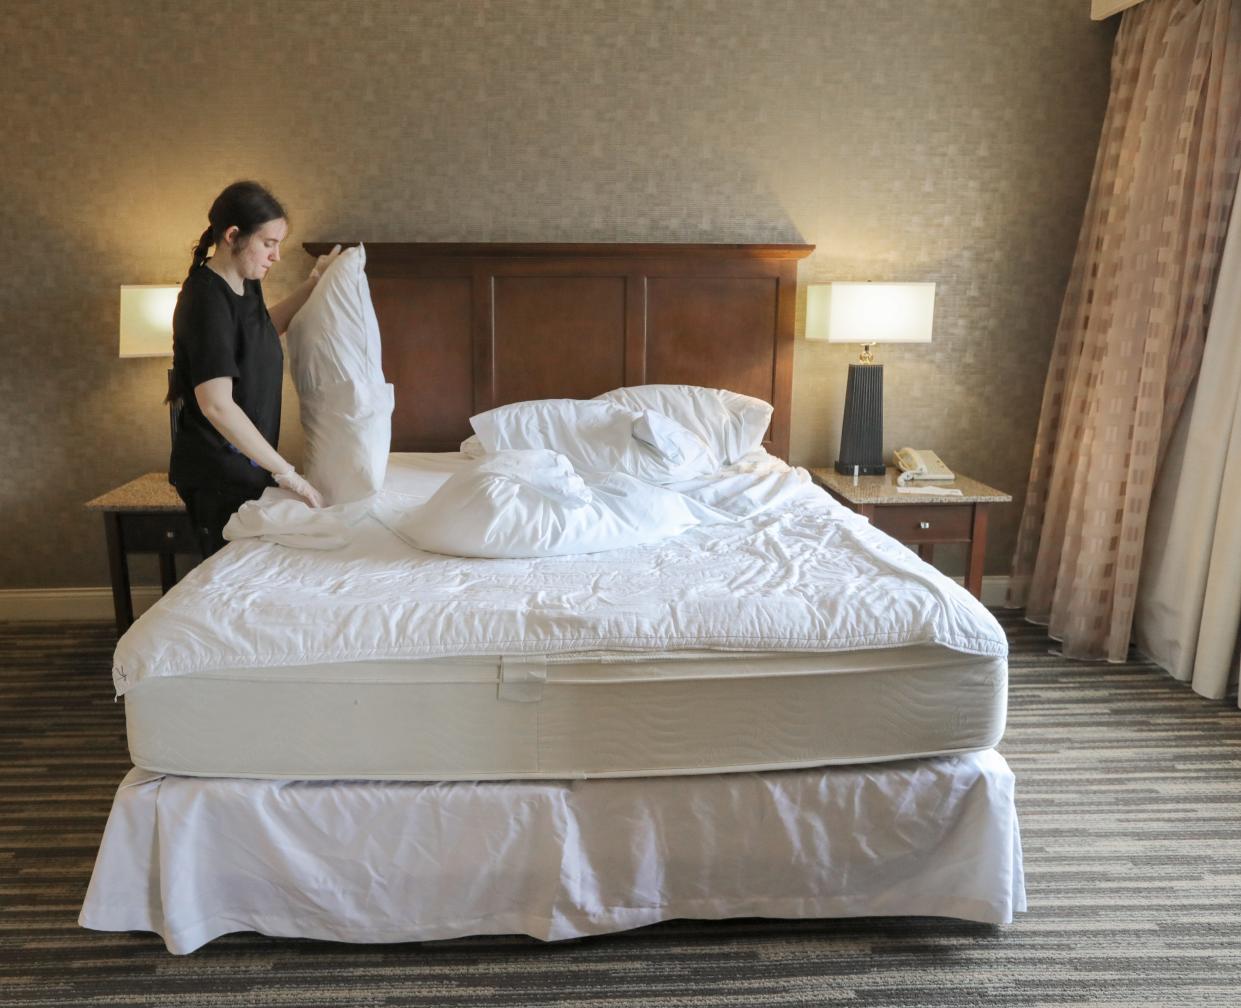 Sheraton Suites suite attendant Jessica Tidwell changes the linens in a guest room on Friday. The 209-room hotel in Cuyahoga Falls is sold out for both Sunday and Monday nights.